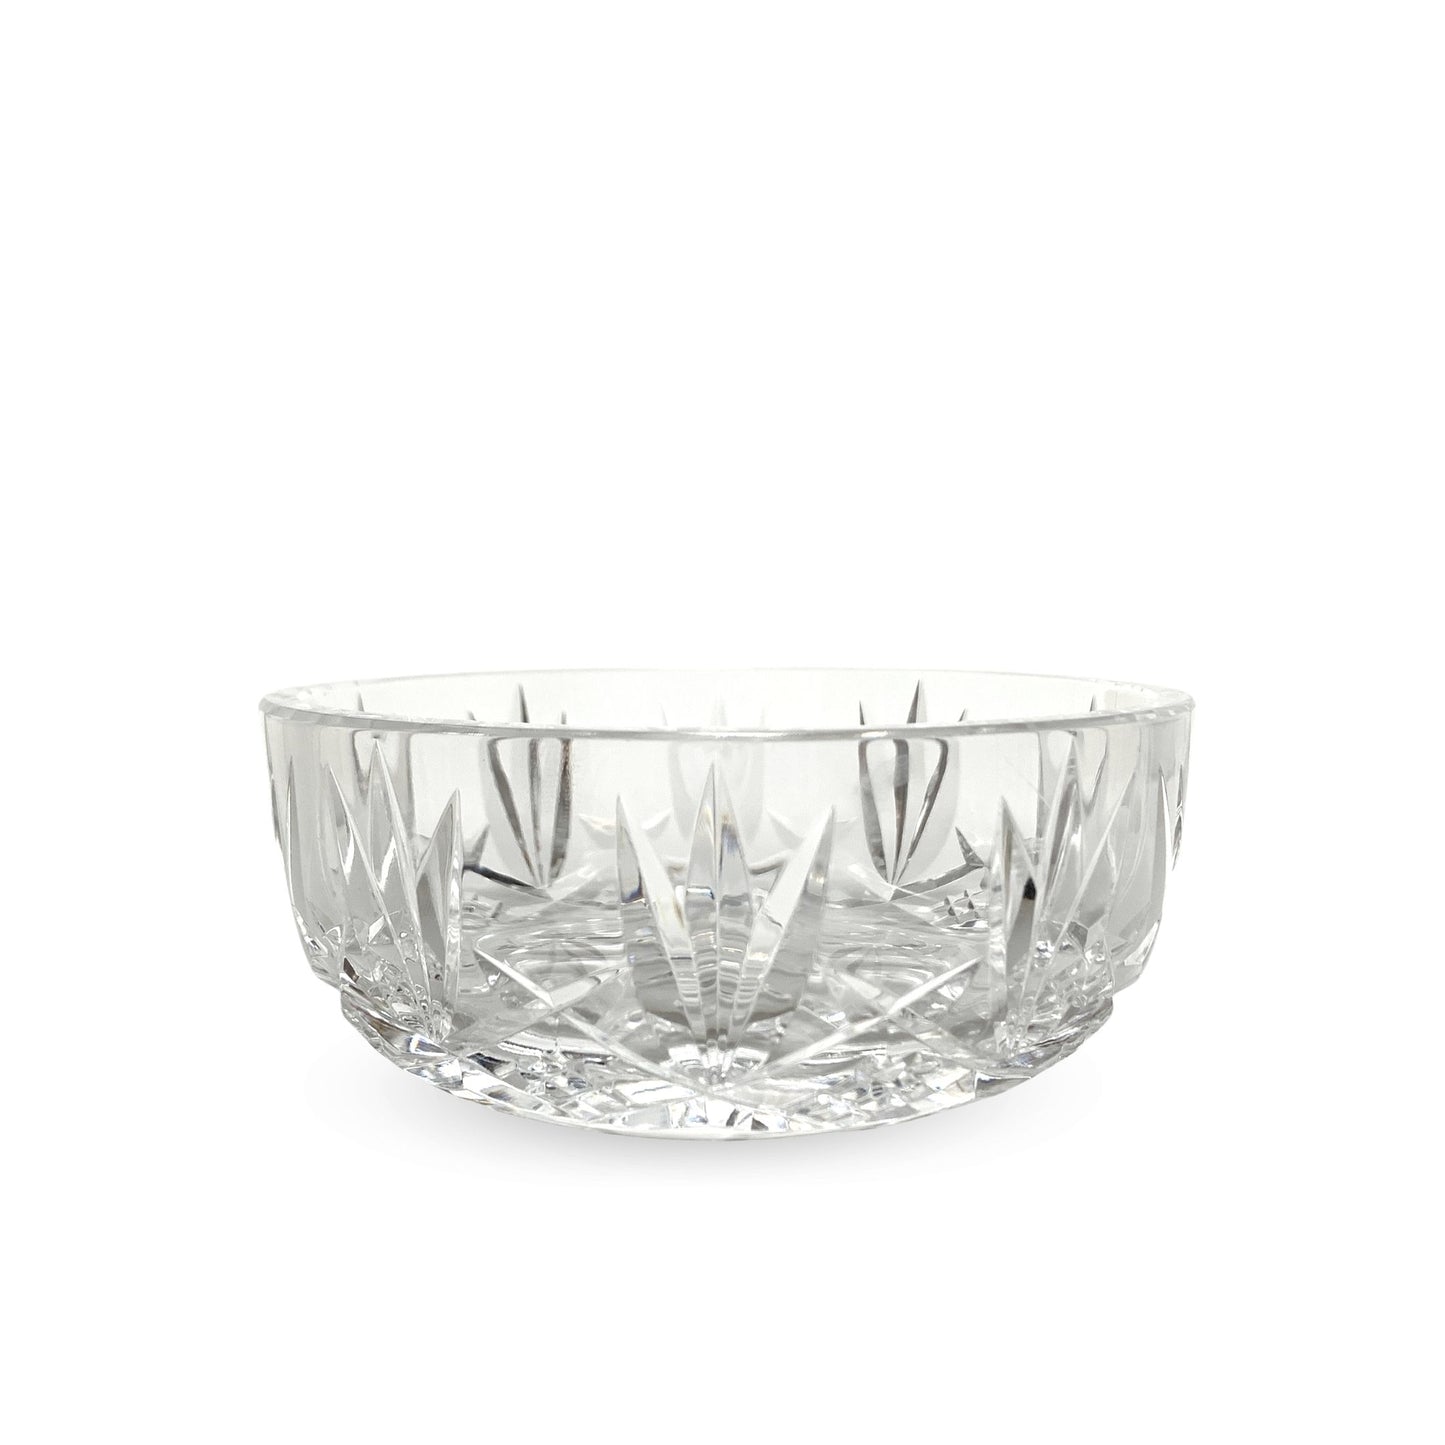 Waterford Crystal Bowl Signed Jim Oleary 1988